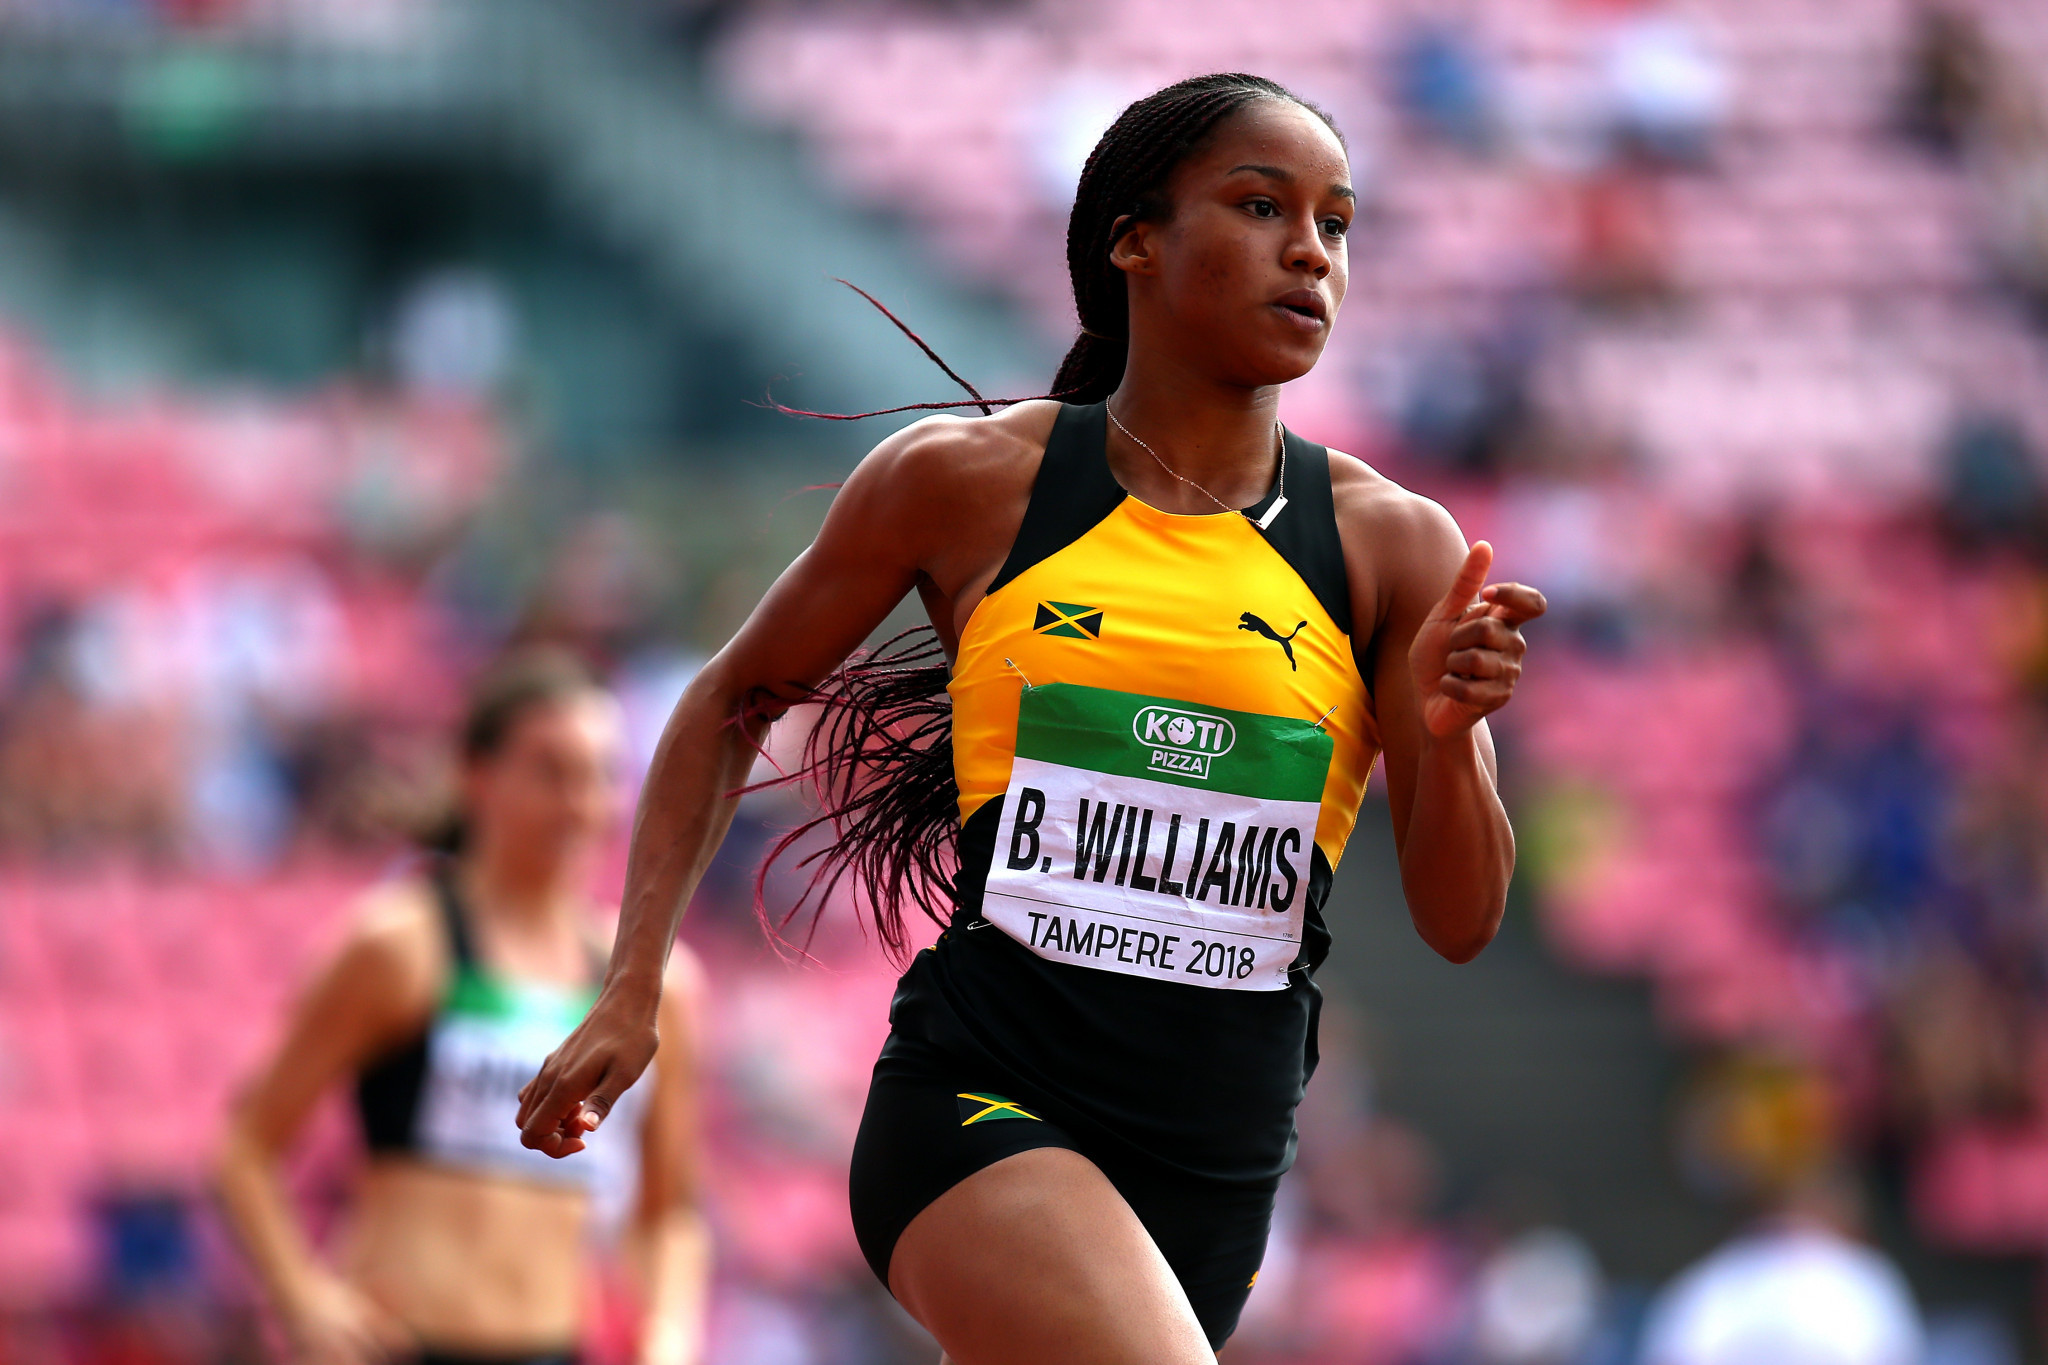 Williams completes sublime sprint double over 200m at IAAF World Under-20 Championships in Tampere